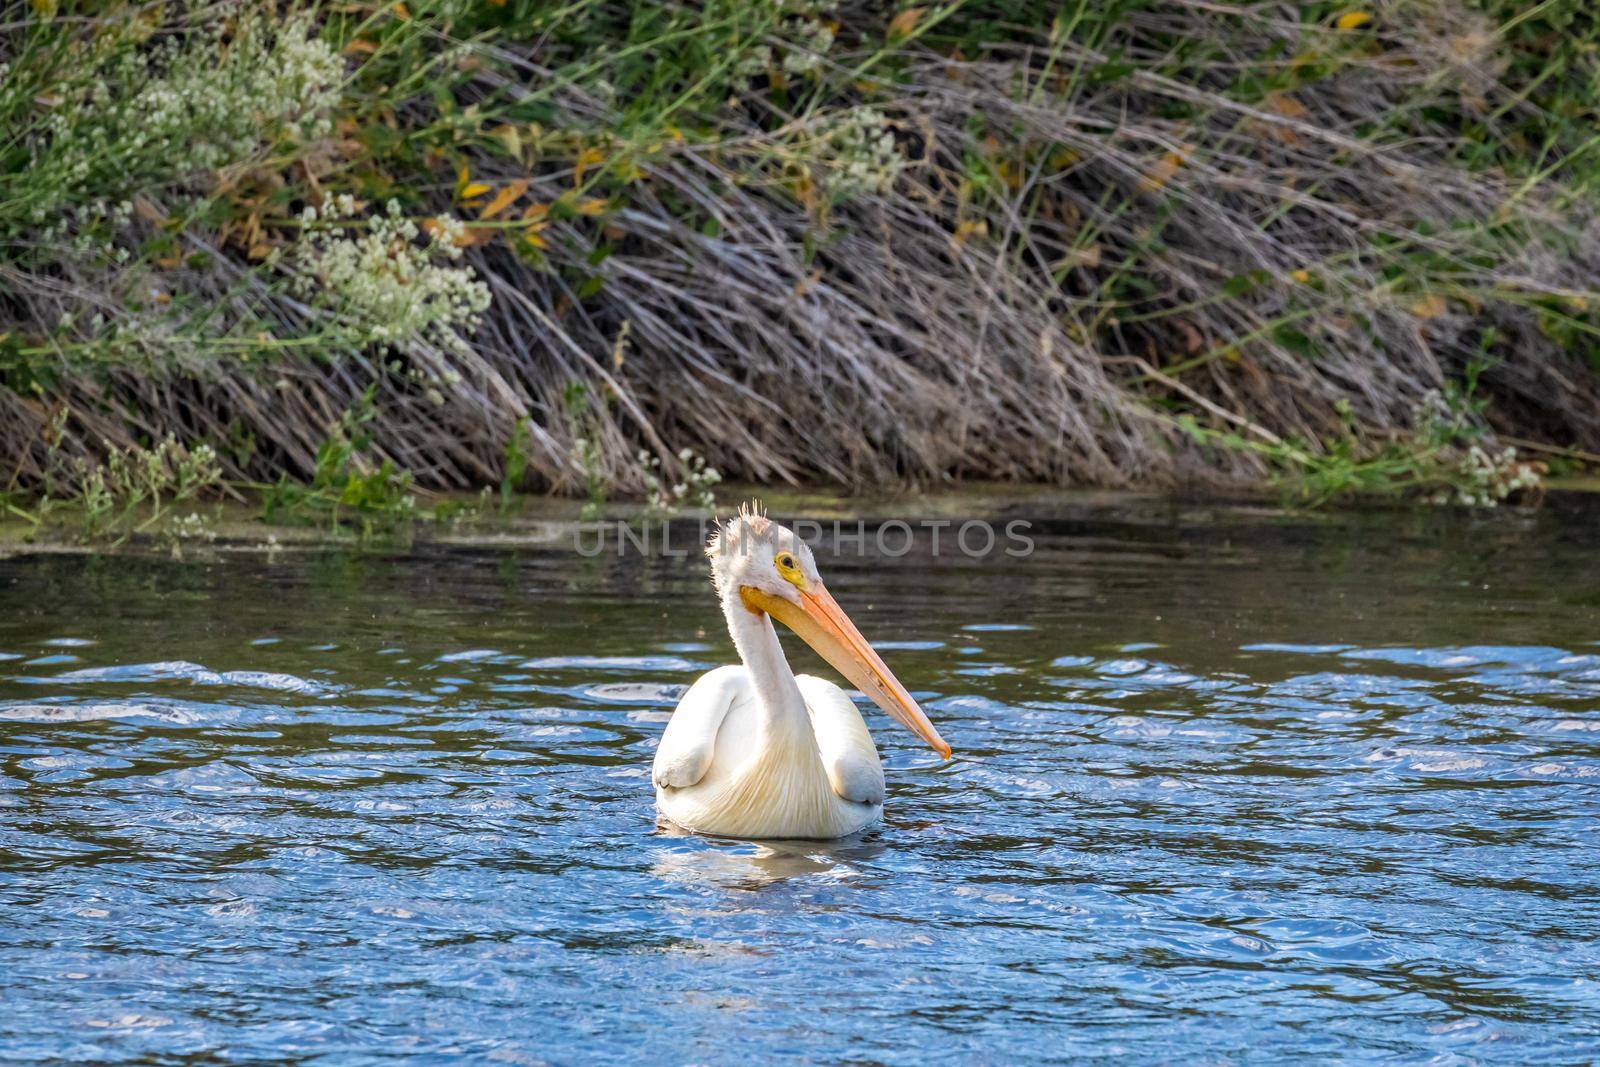 An American White Pelican swimming in water